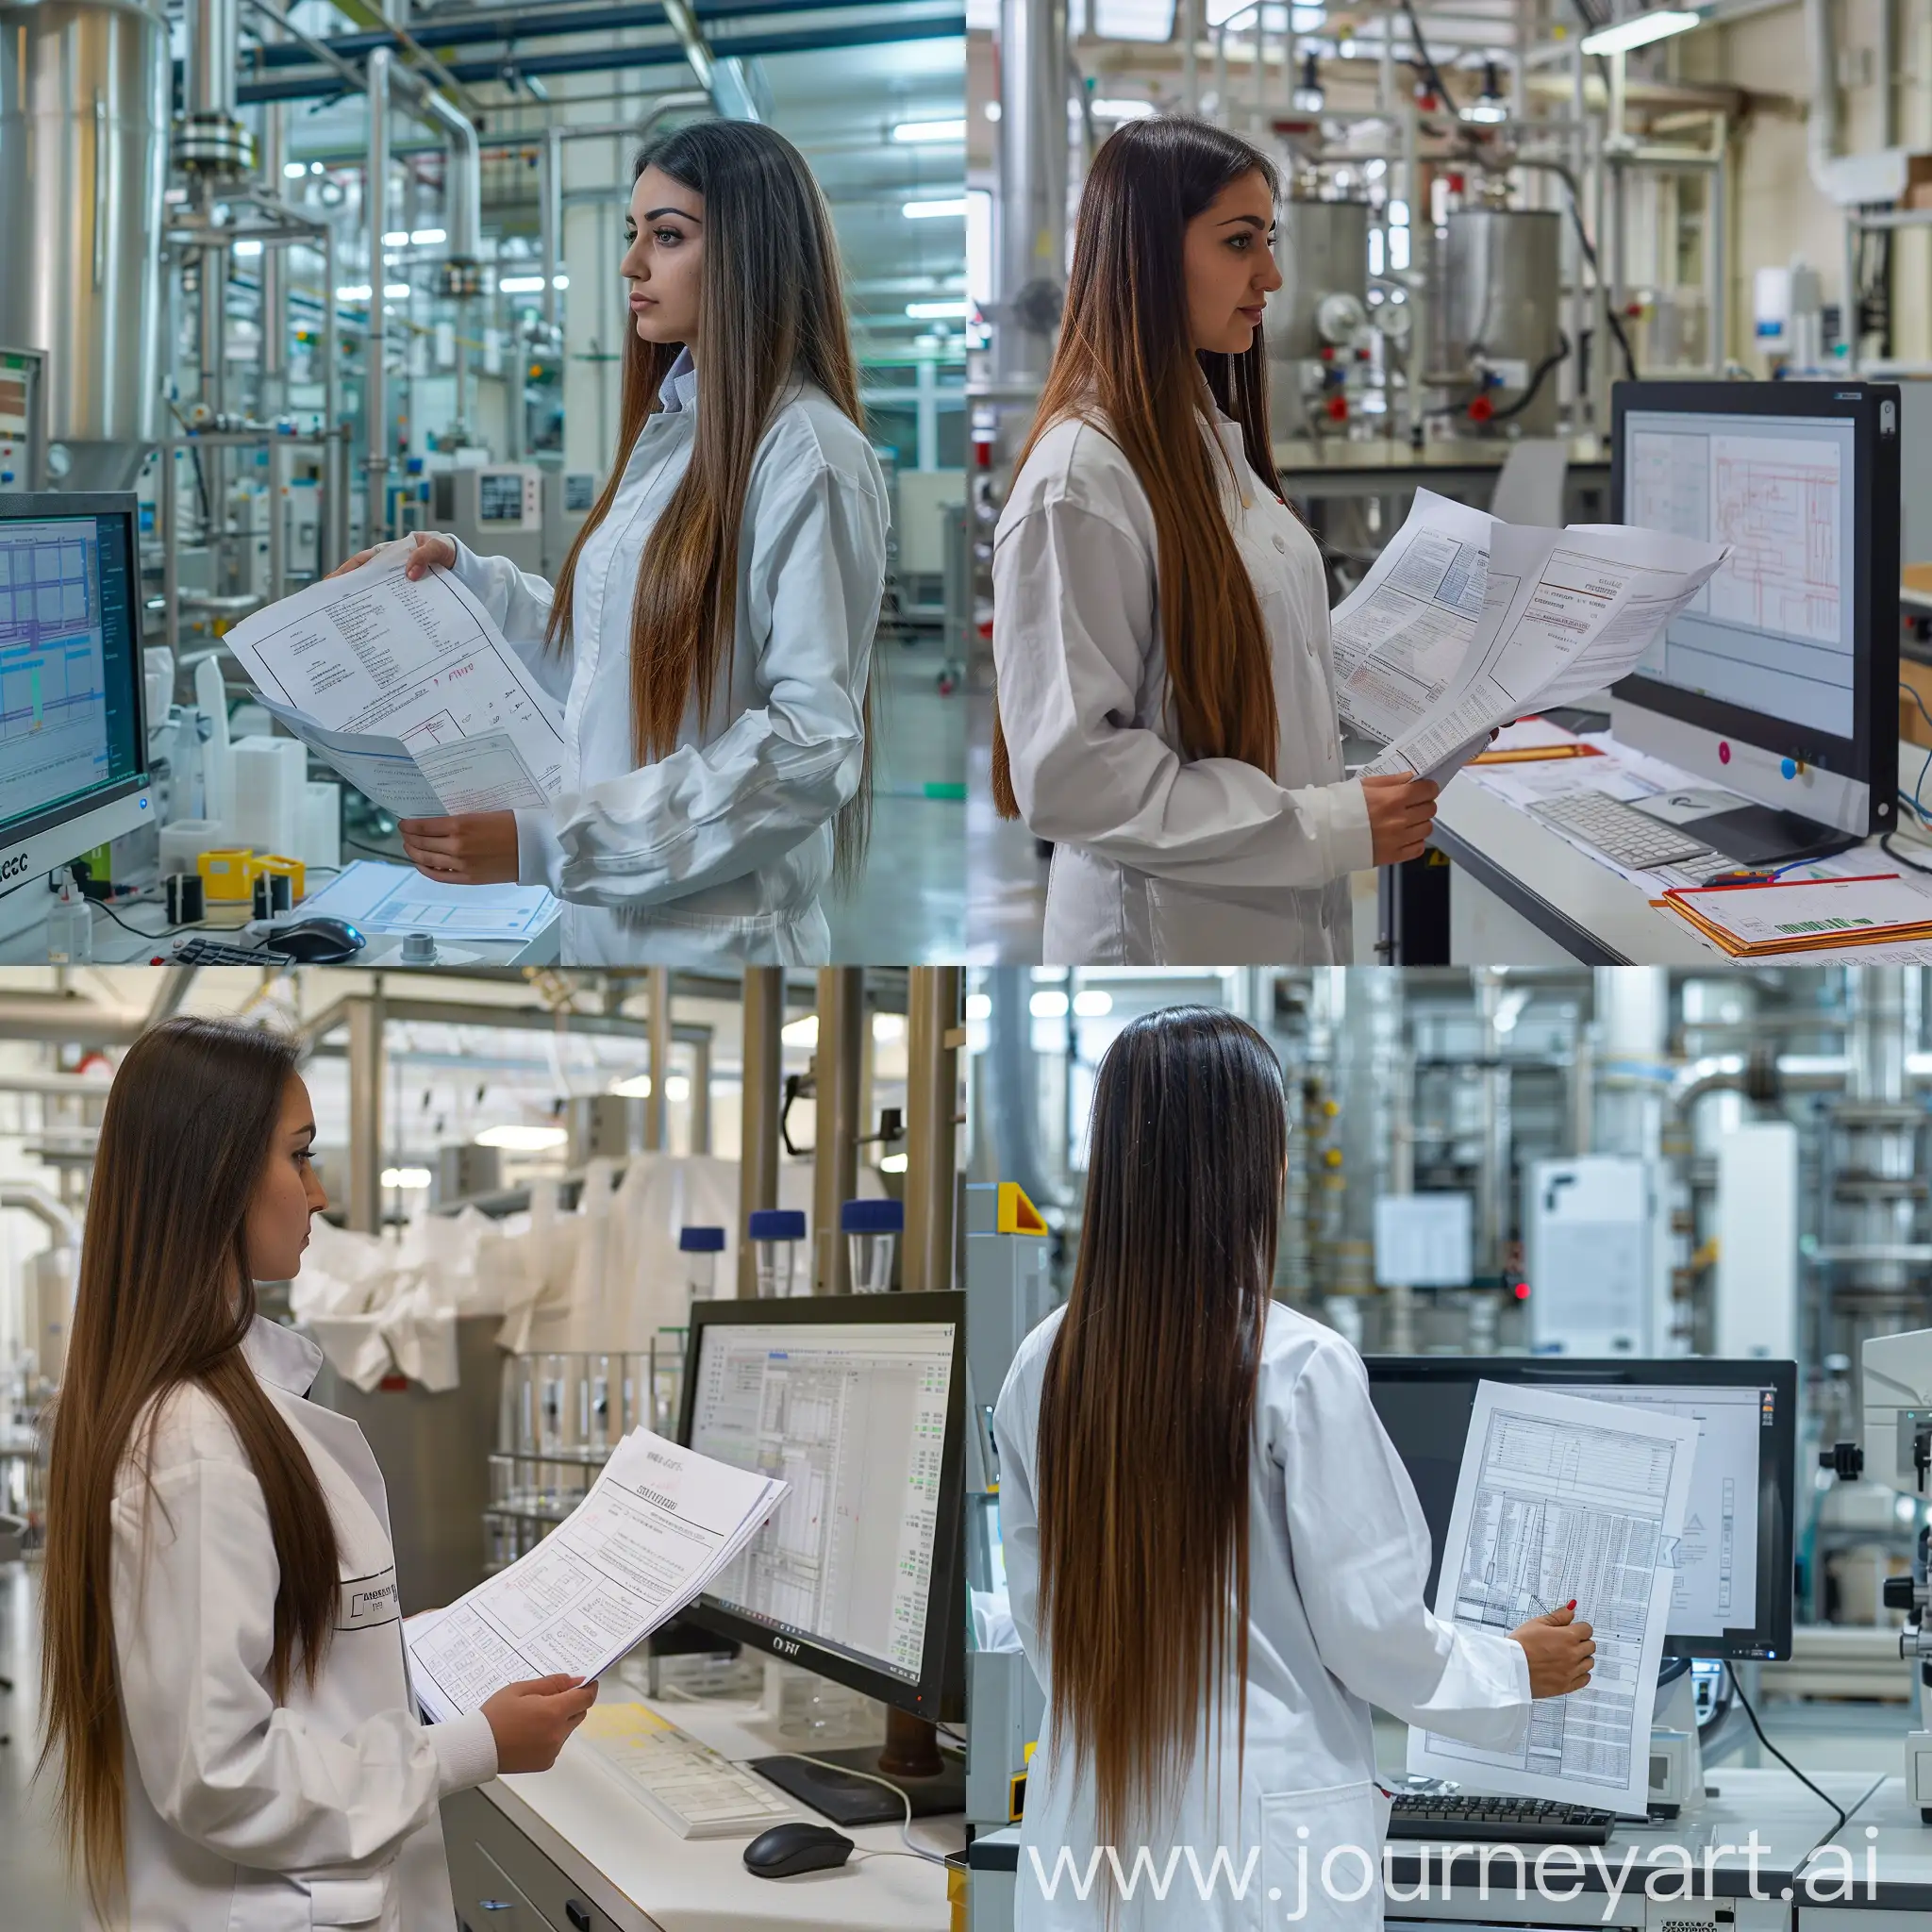 A chemical industrial inside a lab  and a women in front and she is holding  some documents. This women is tall with straight long brown hair and she has a turkey and German lineage. She is using a labor white tunic and safety boots. She is looking at computer with the program Wincc which show the schematics from the fabric